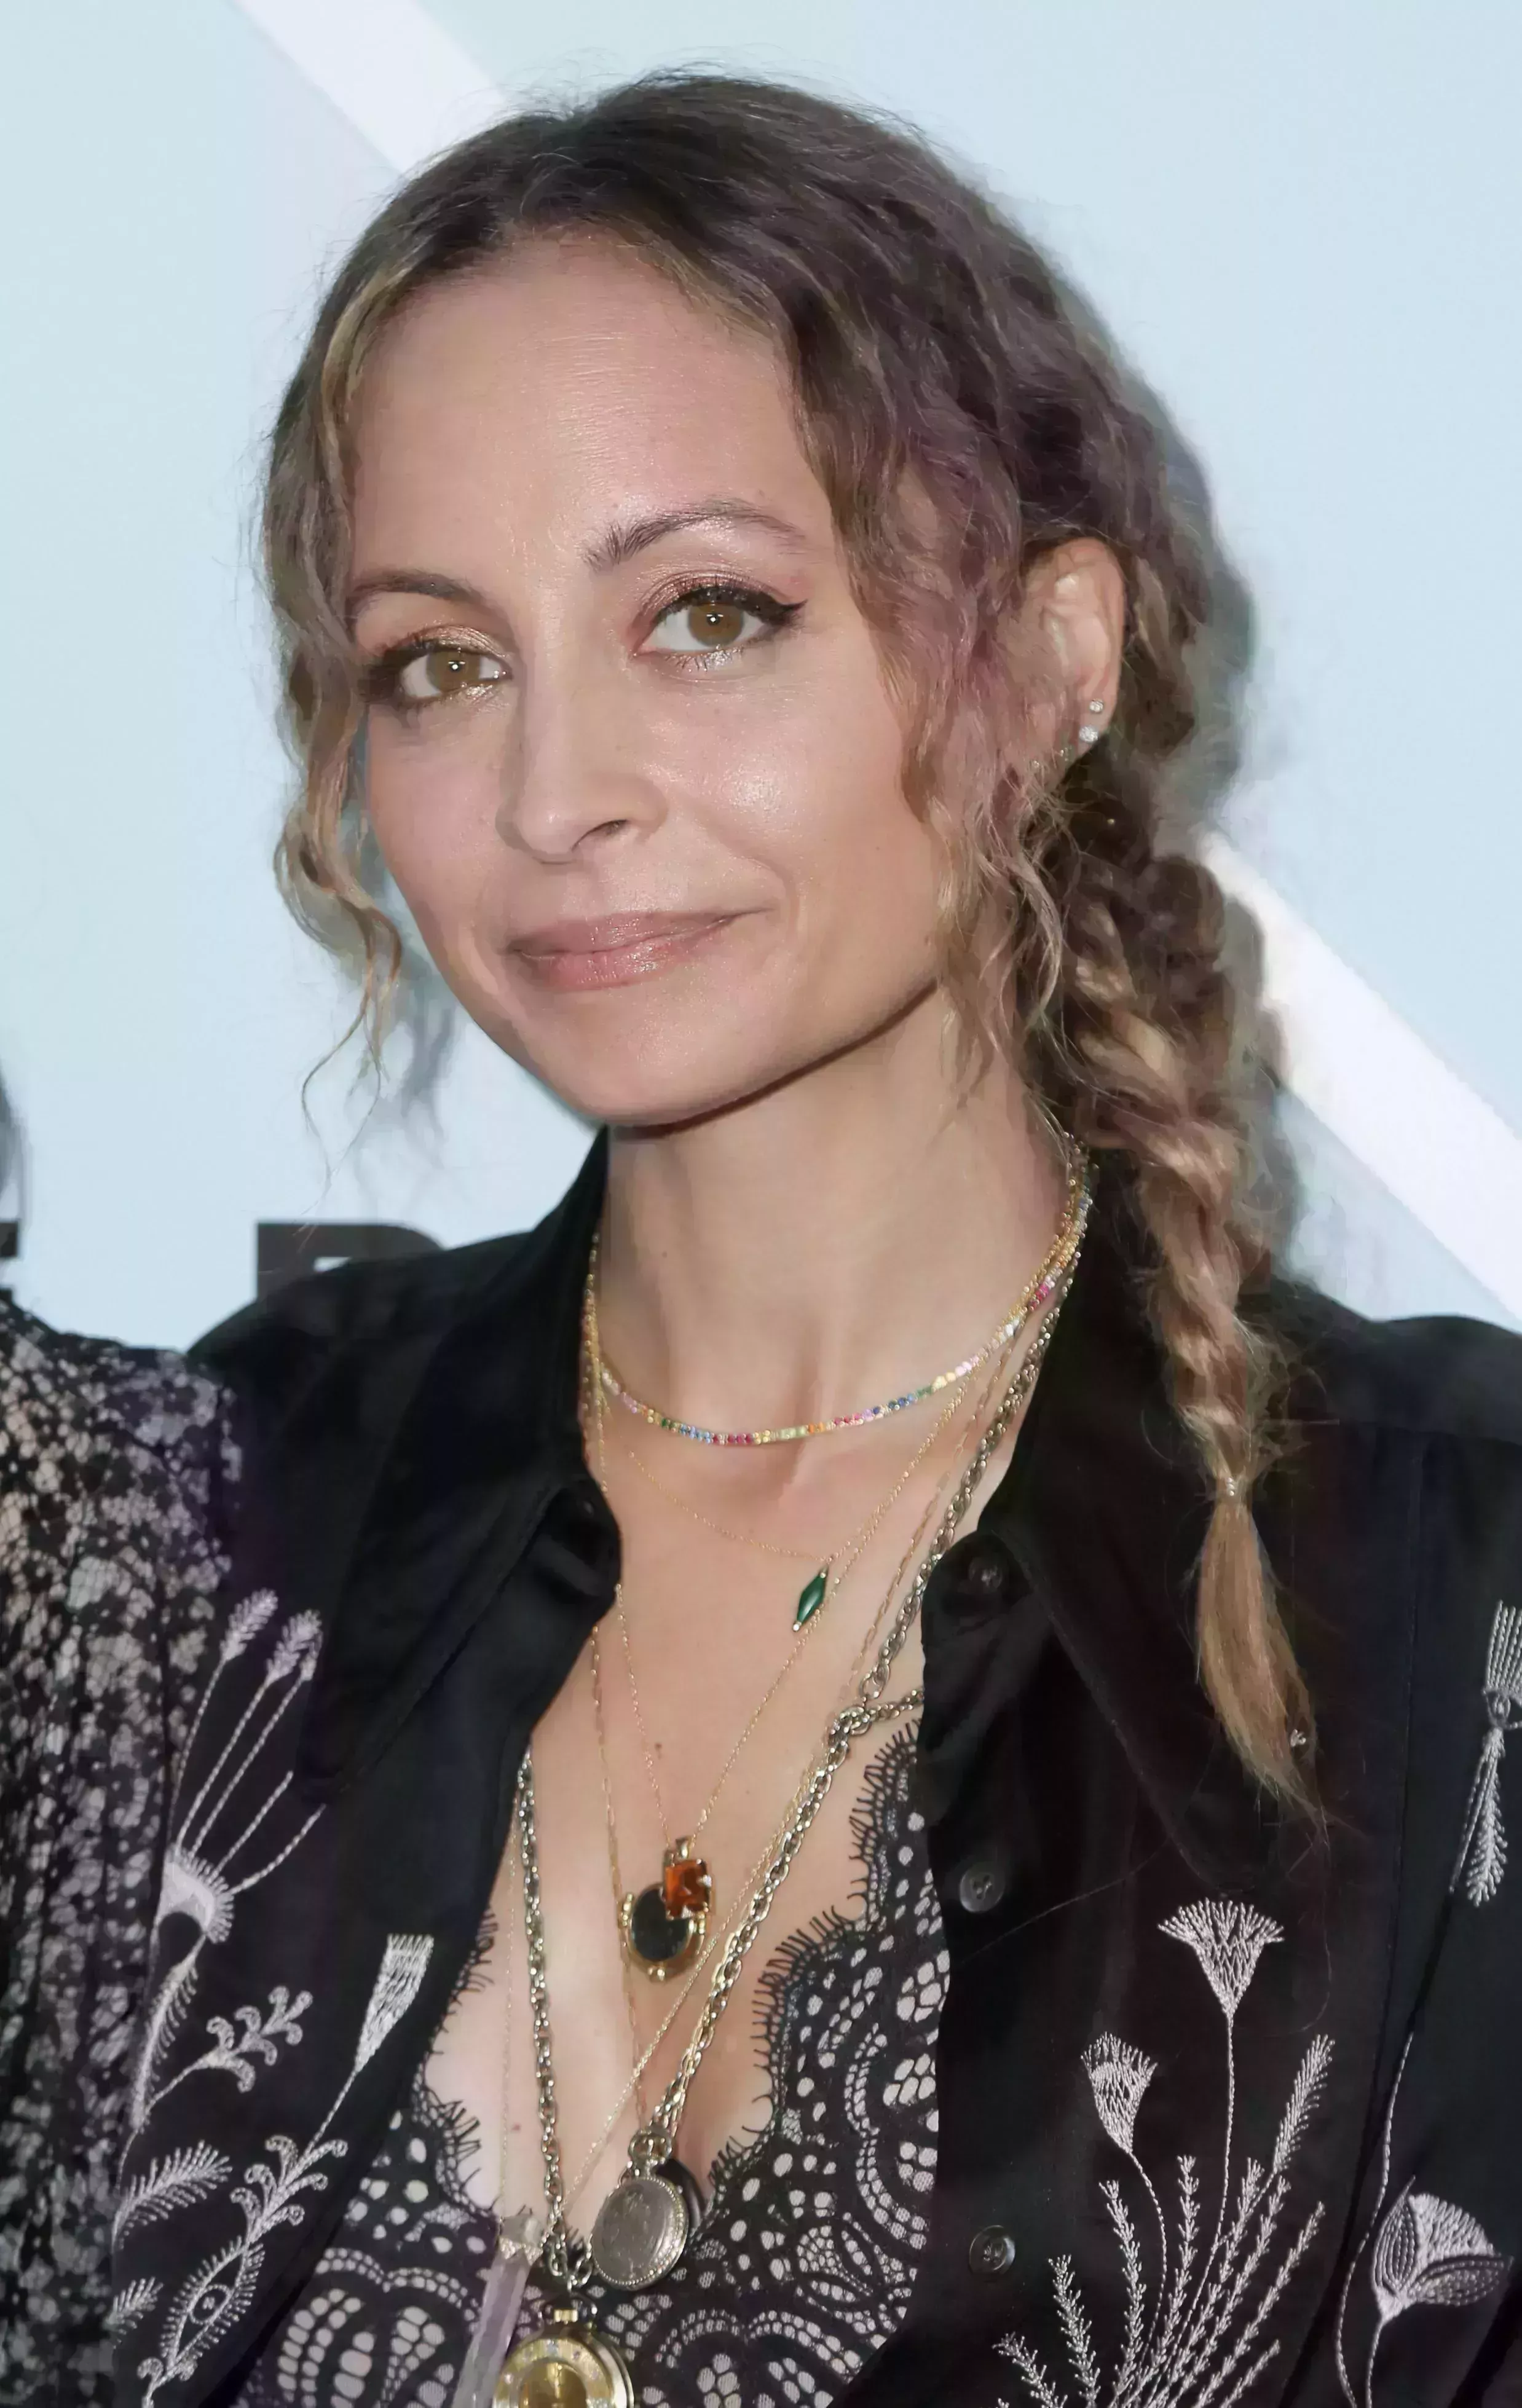 Nicole Richie’s Short Braid with Frizzy Waves